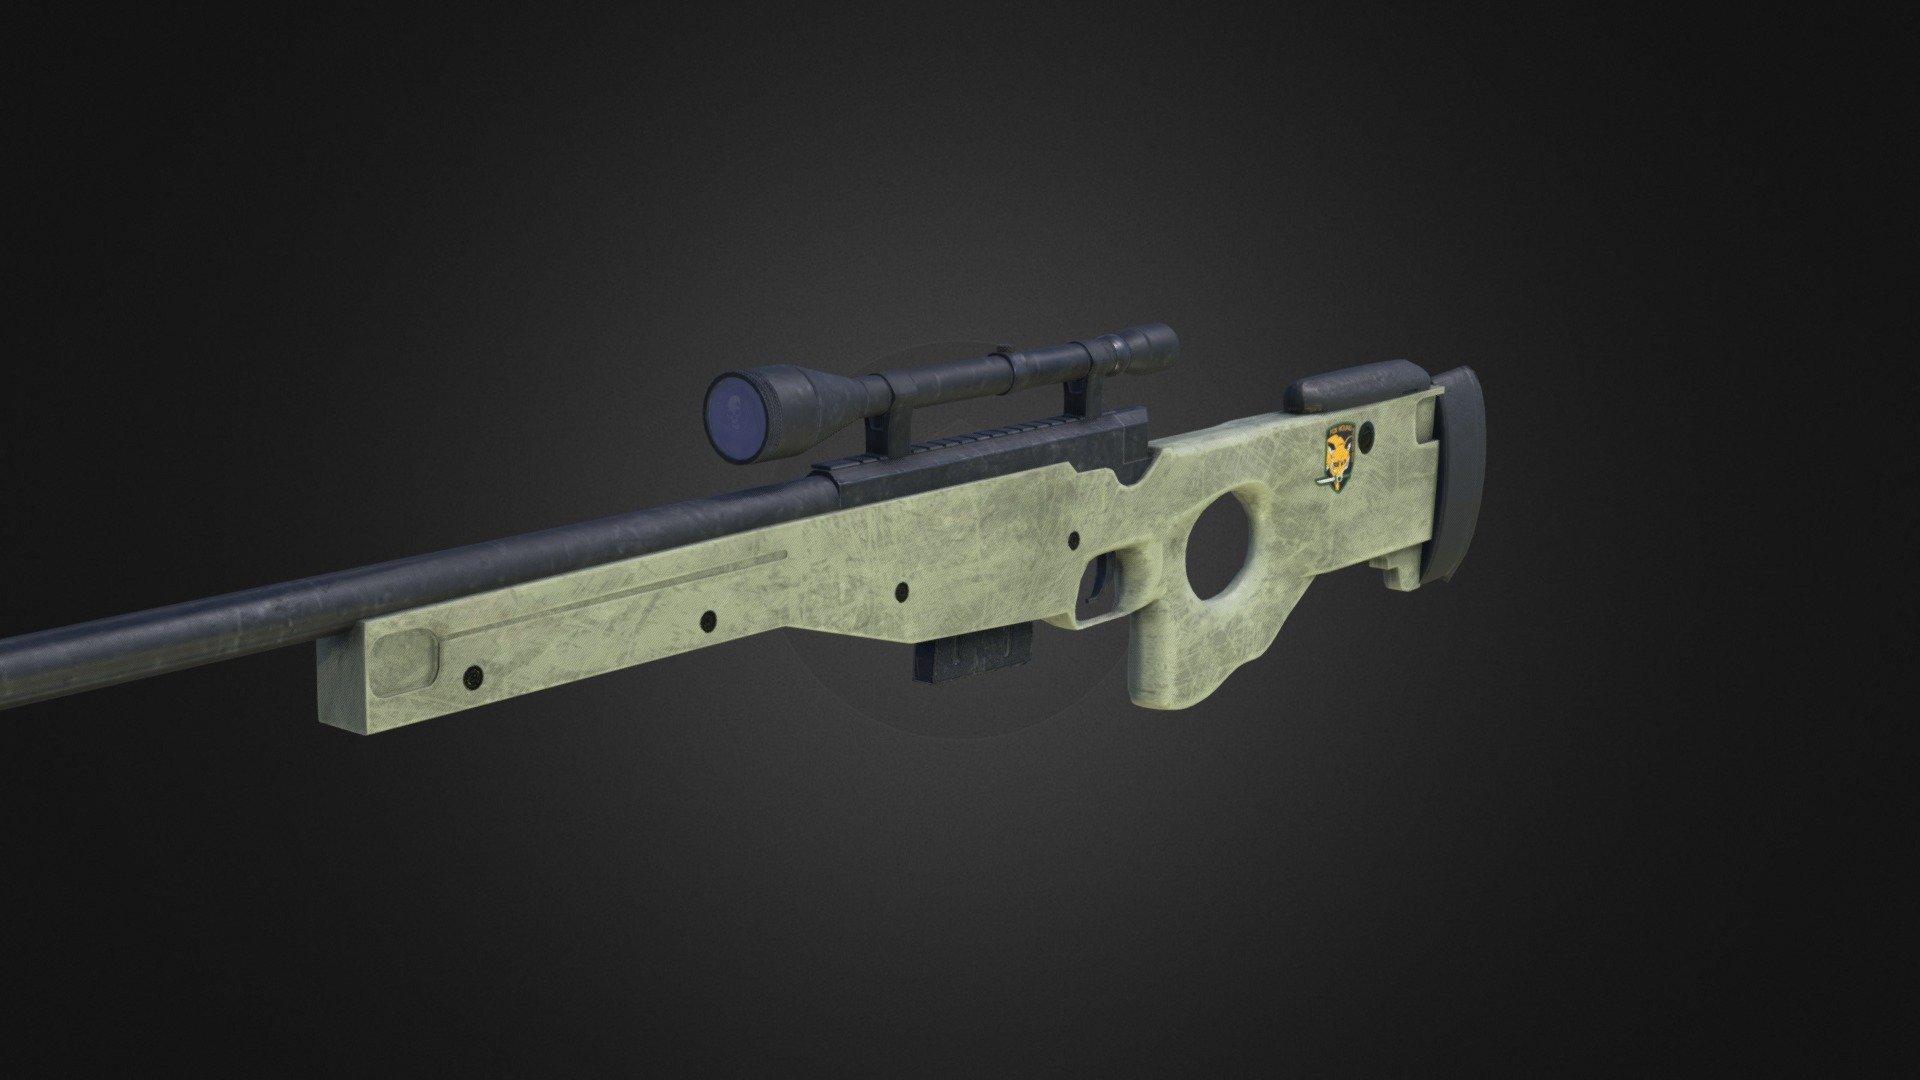 Awp cannons карта мастерская фото 24